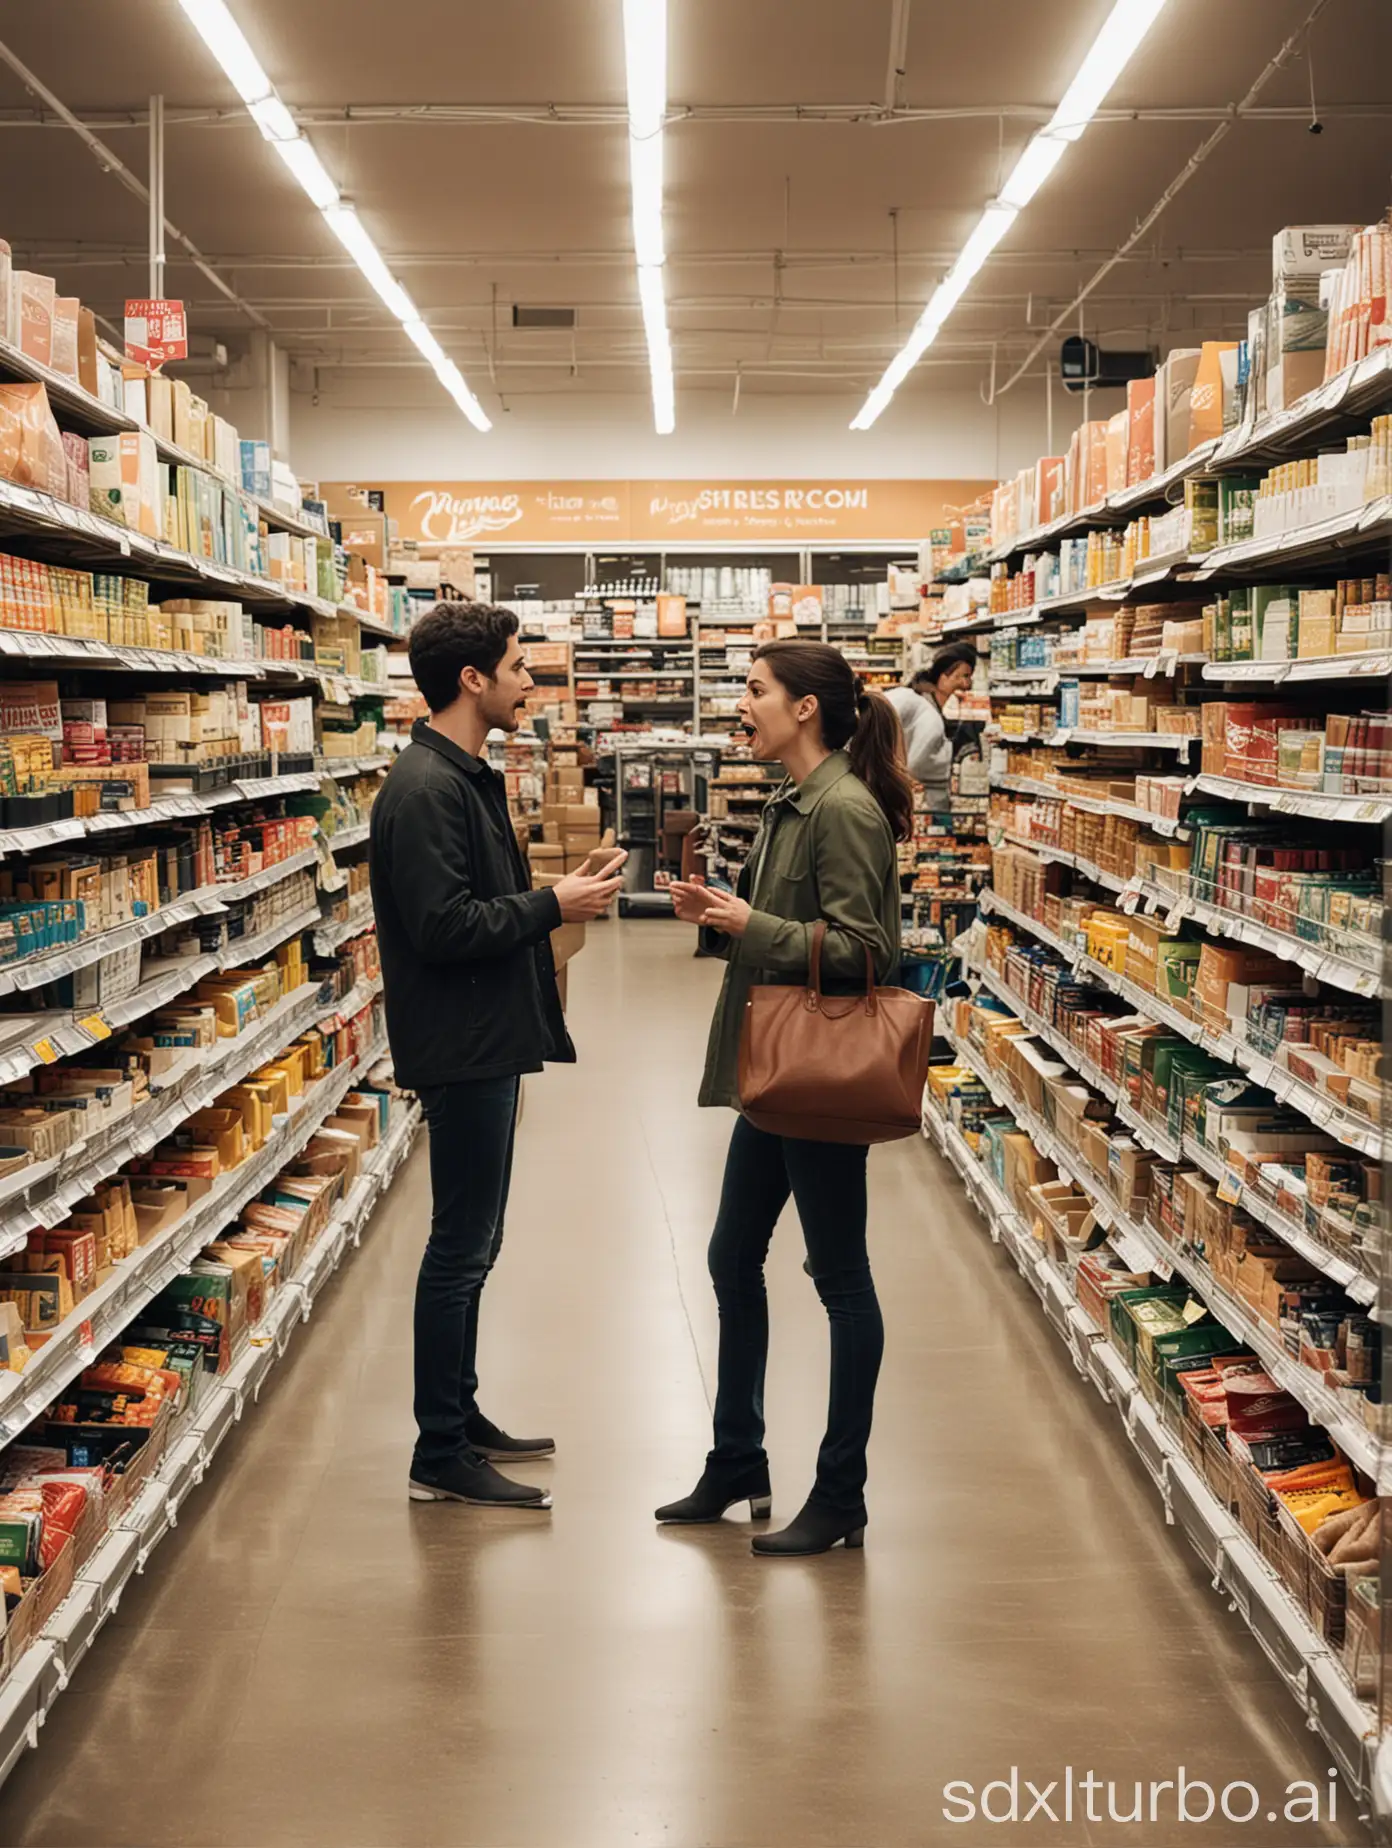 Animated-Scene-Busy-Grocery-Store-with-Contentious-Shoppers